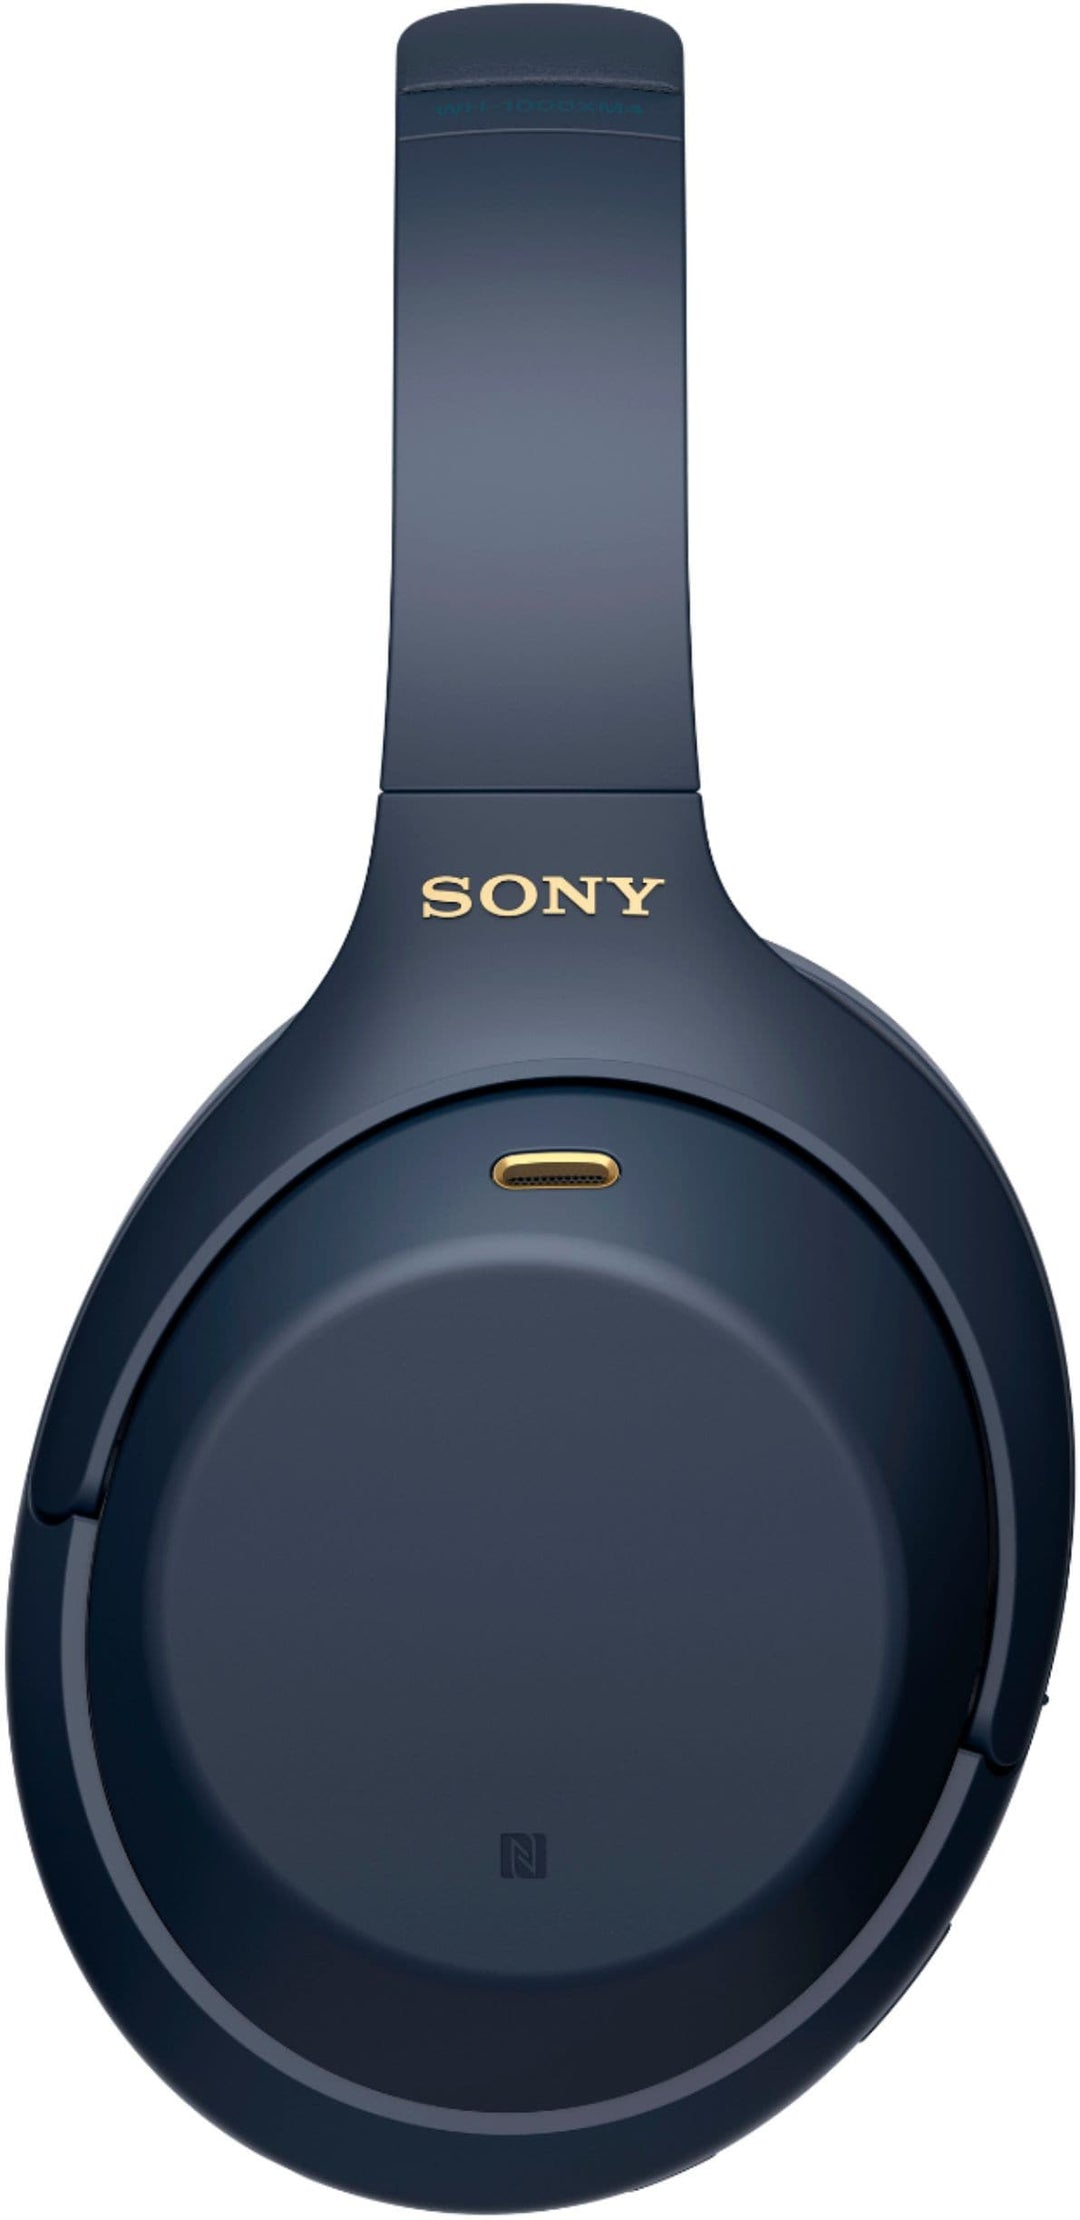 Sony - WH-1000XM4 Wireless Noise-Cancelling Over-the-Ear Headphones - Midnight Blue_2